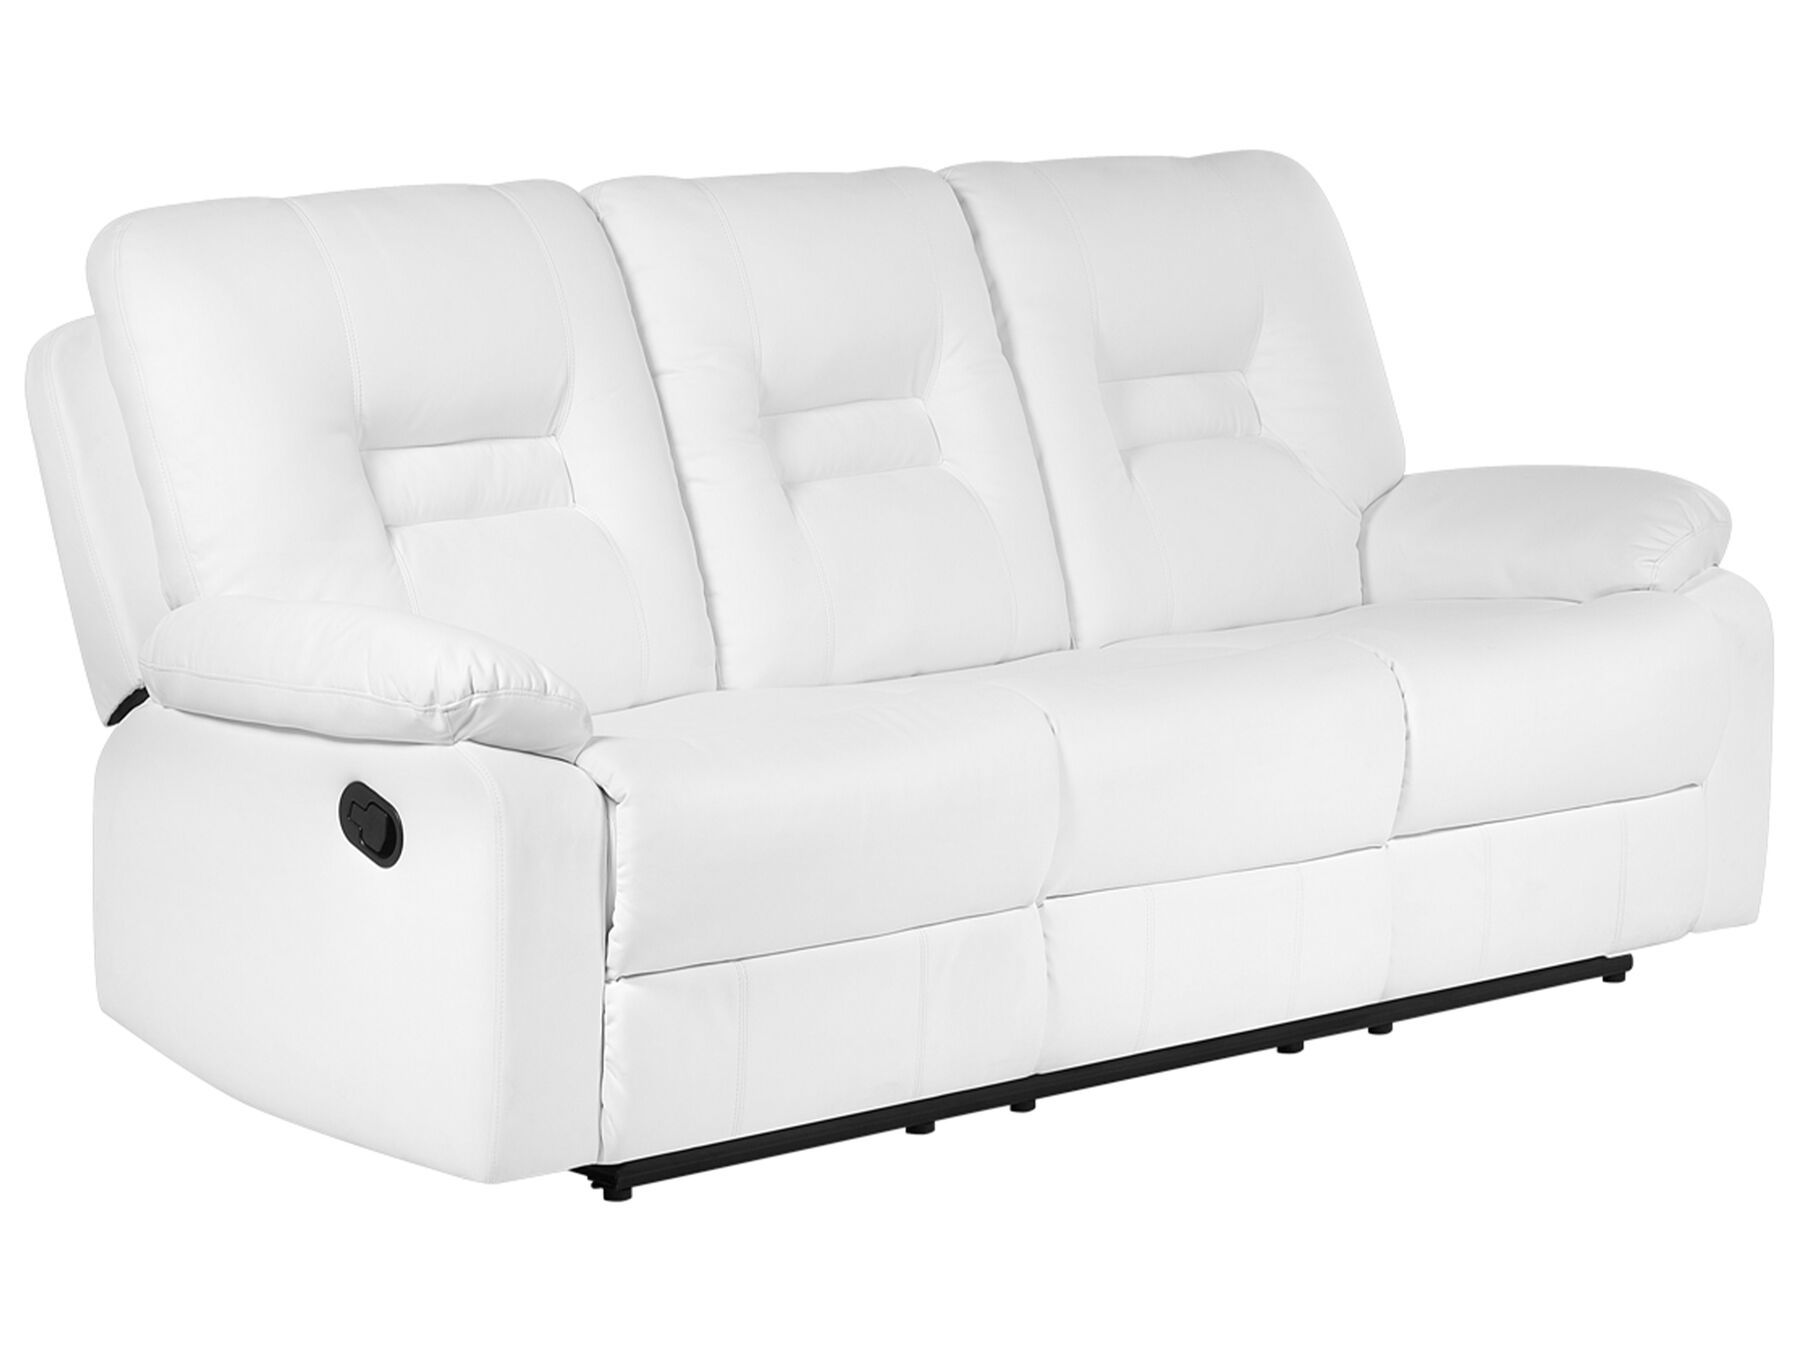 3 Seater Faux Leather Recliner Sofa White Bergen | Beliani (View 20 of 20)